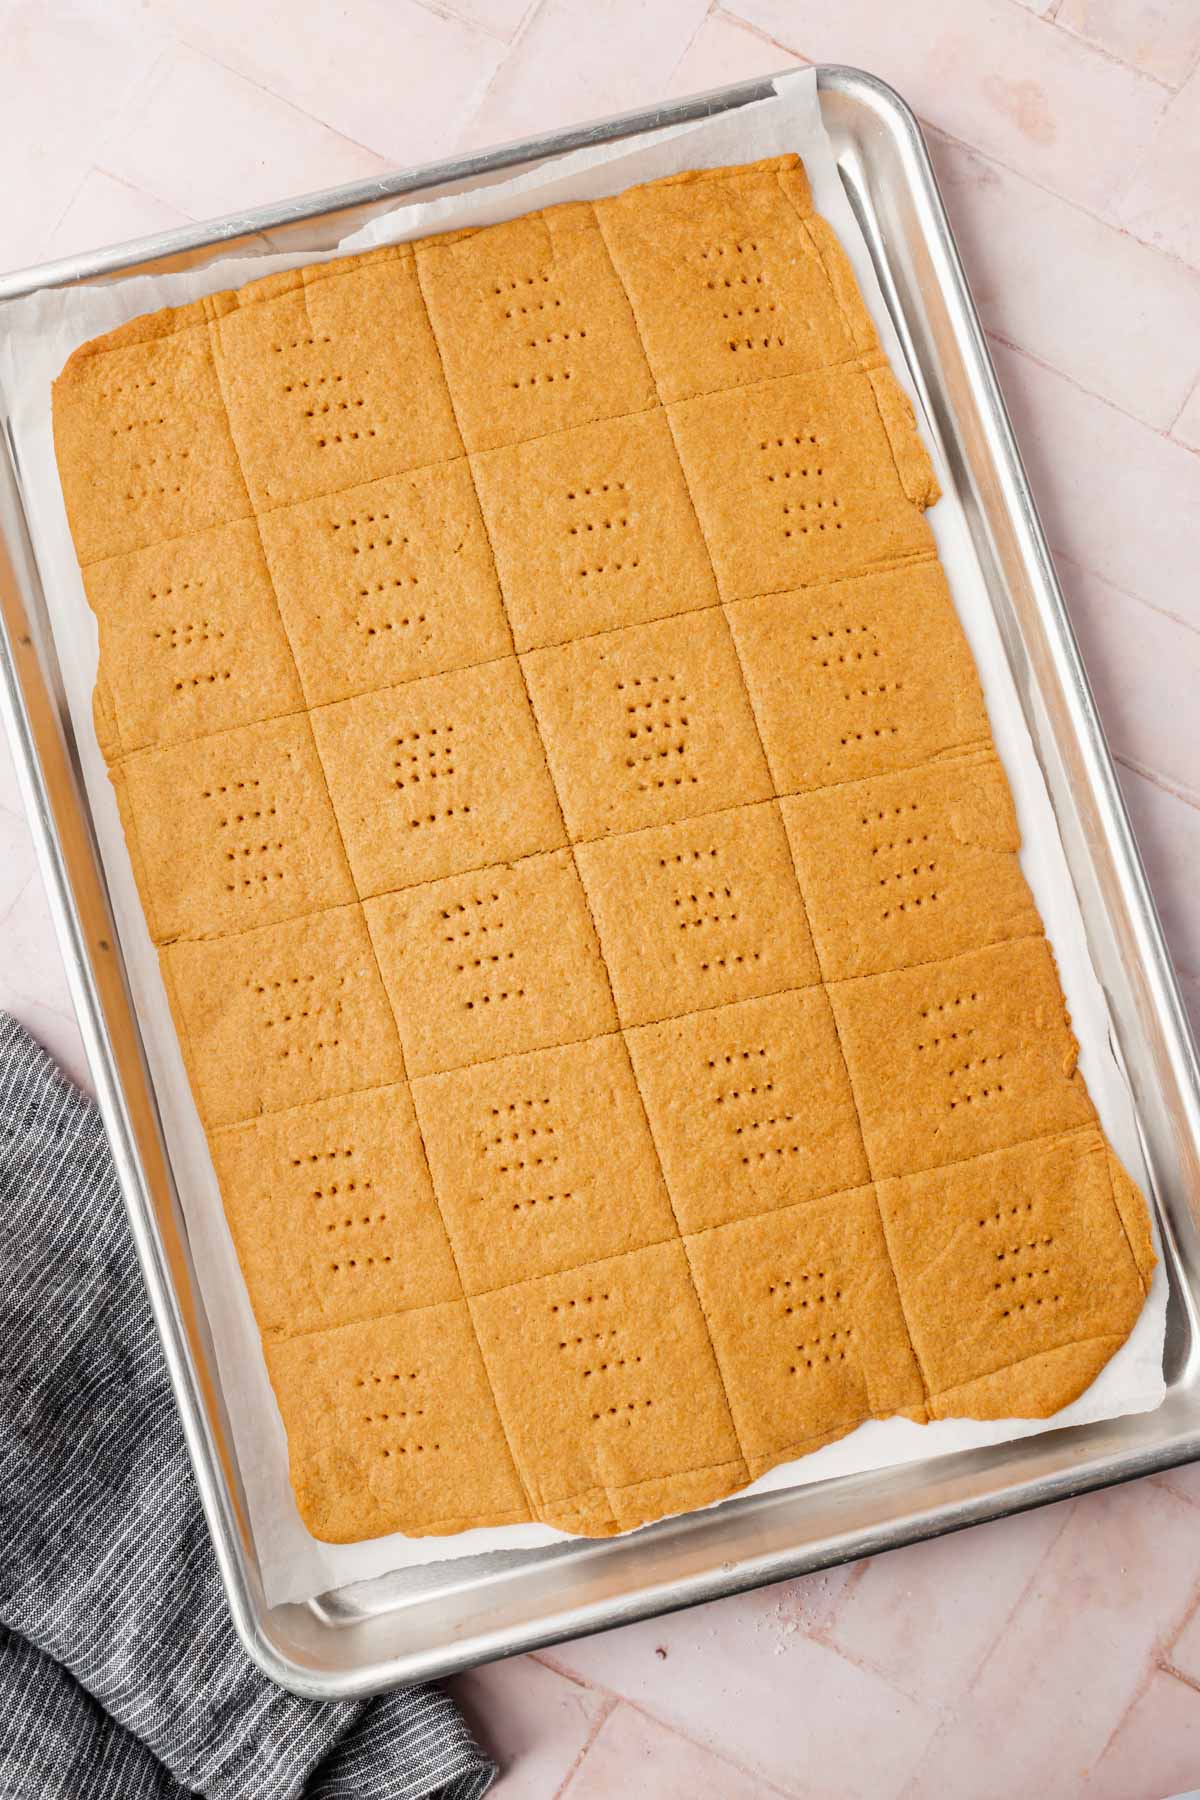 Baked graham crackers on a baking sheet.